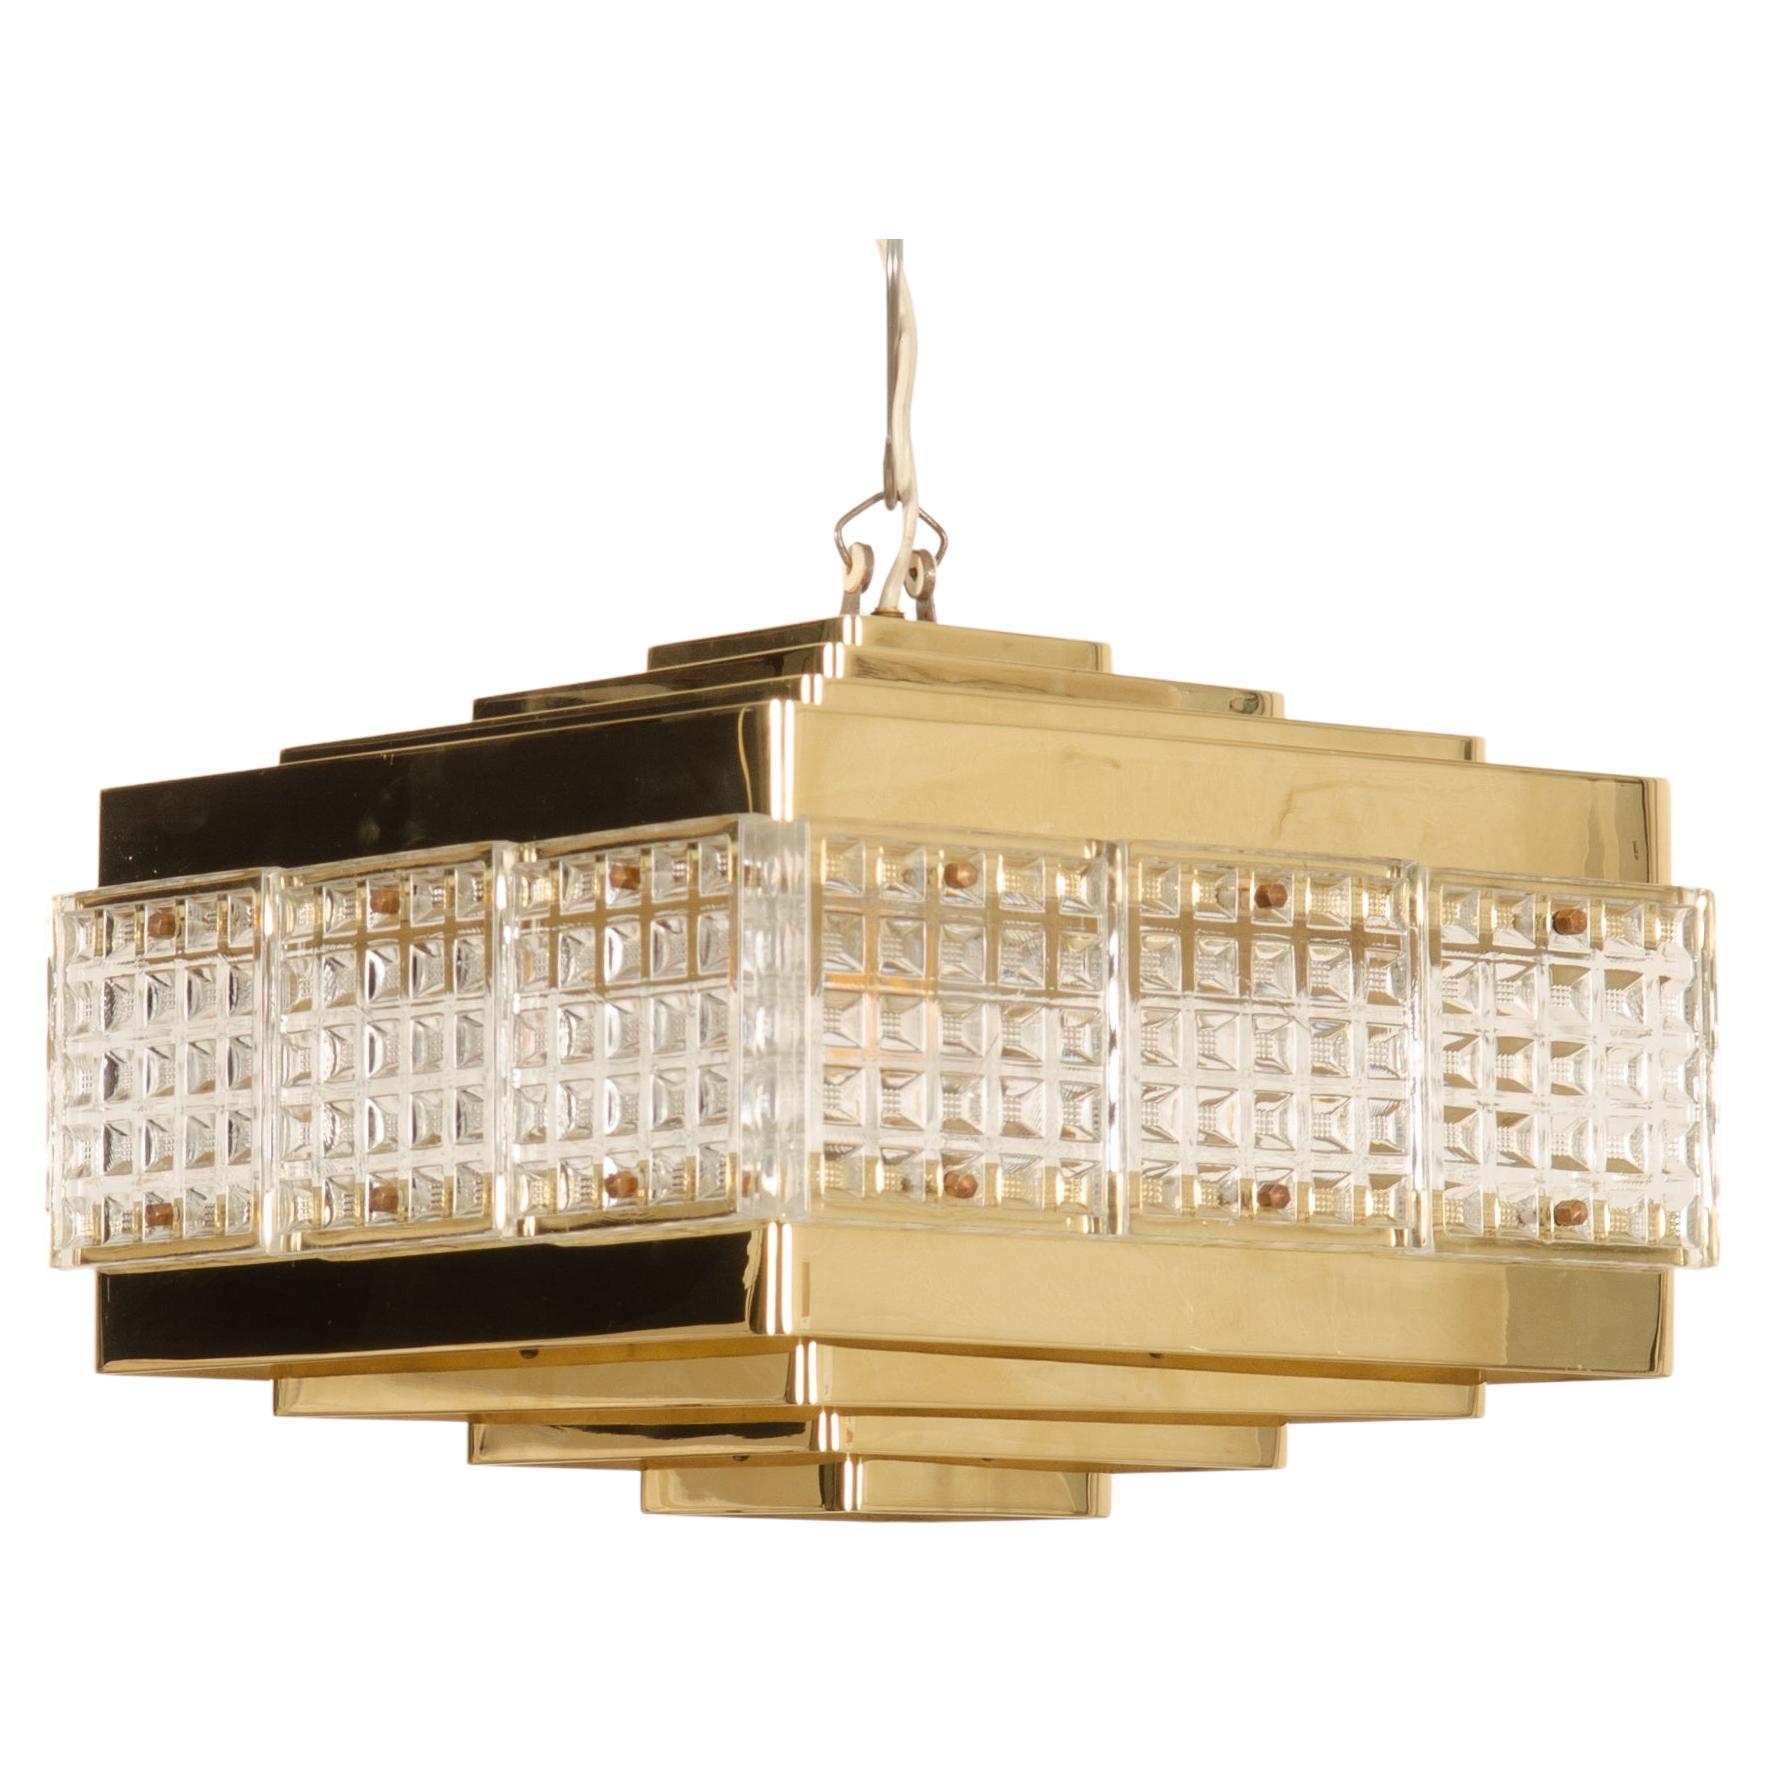 Brass and Glass Chandelier by Orrefors from the 1960s